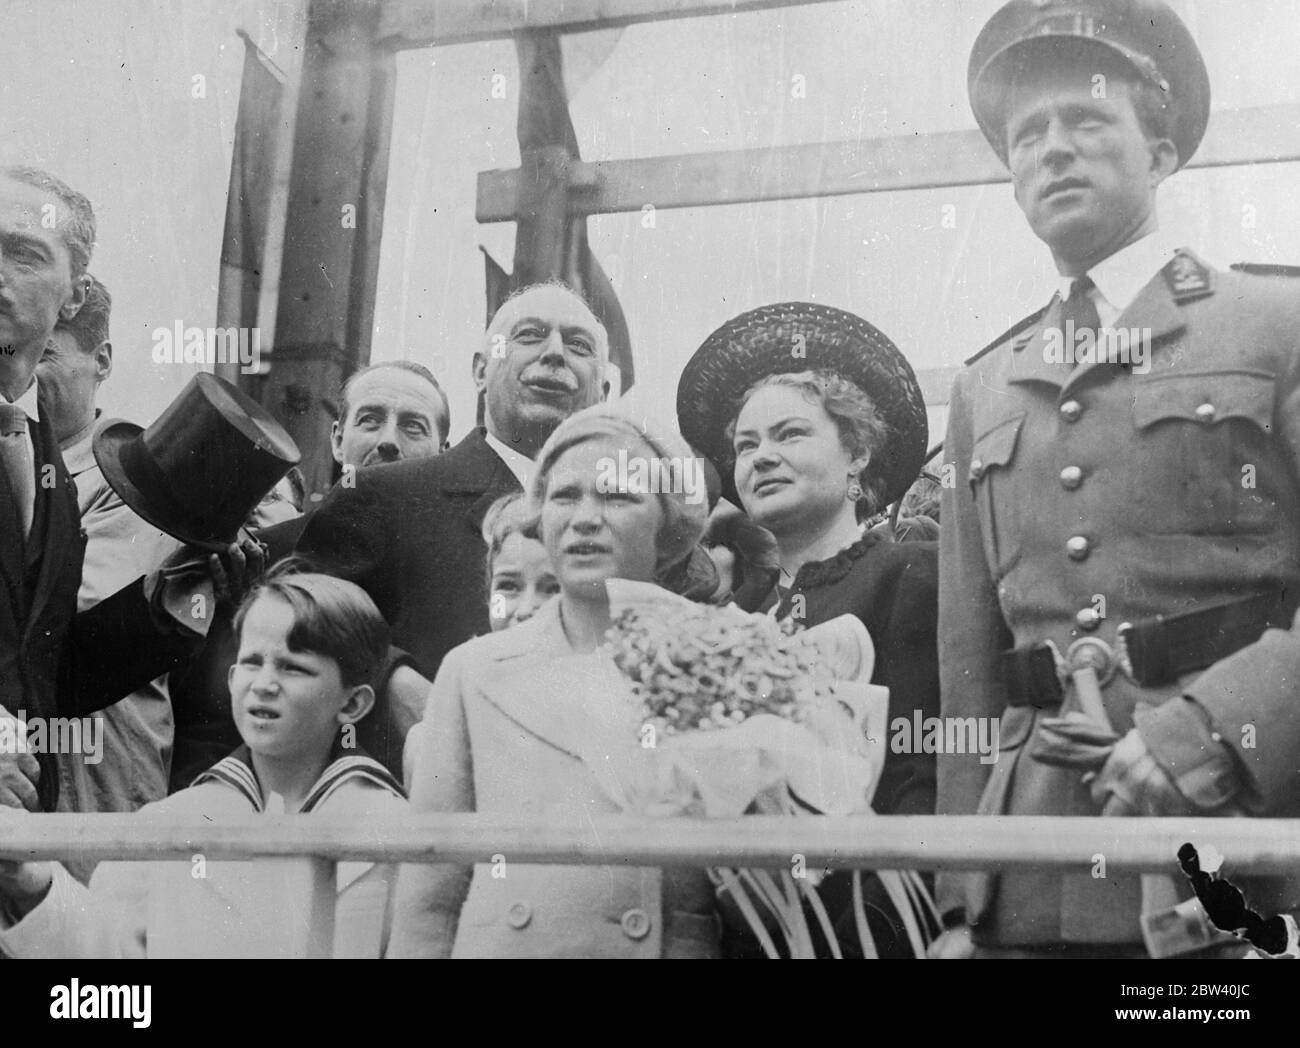 Royals children watch as King Leopold launches two ships. King Leopold of the Belgians, accompanied by two of his children - Crown Prince Baudoin and Princess Josephine Charlotte, lunched two ships at Hoboken, Antwerp. The vessels were the Moandar freighter, and Prince Baudoin, a mail steamer. Photo shows: King Leopold (right), Crown Prince Baudoin (left, sailor suit) and Princess Josephine Charlotte (centre) watching as the Prince Baudoin took to water. 24 April 1937 Stock Photo